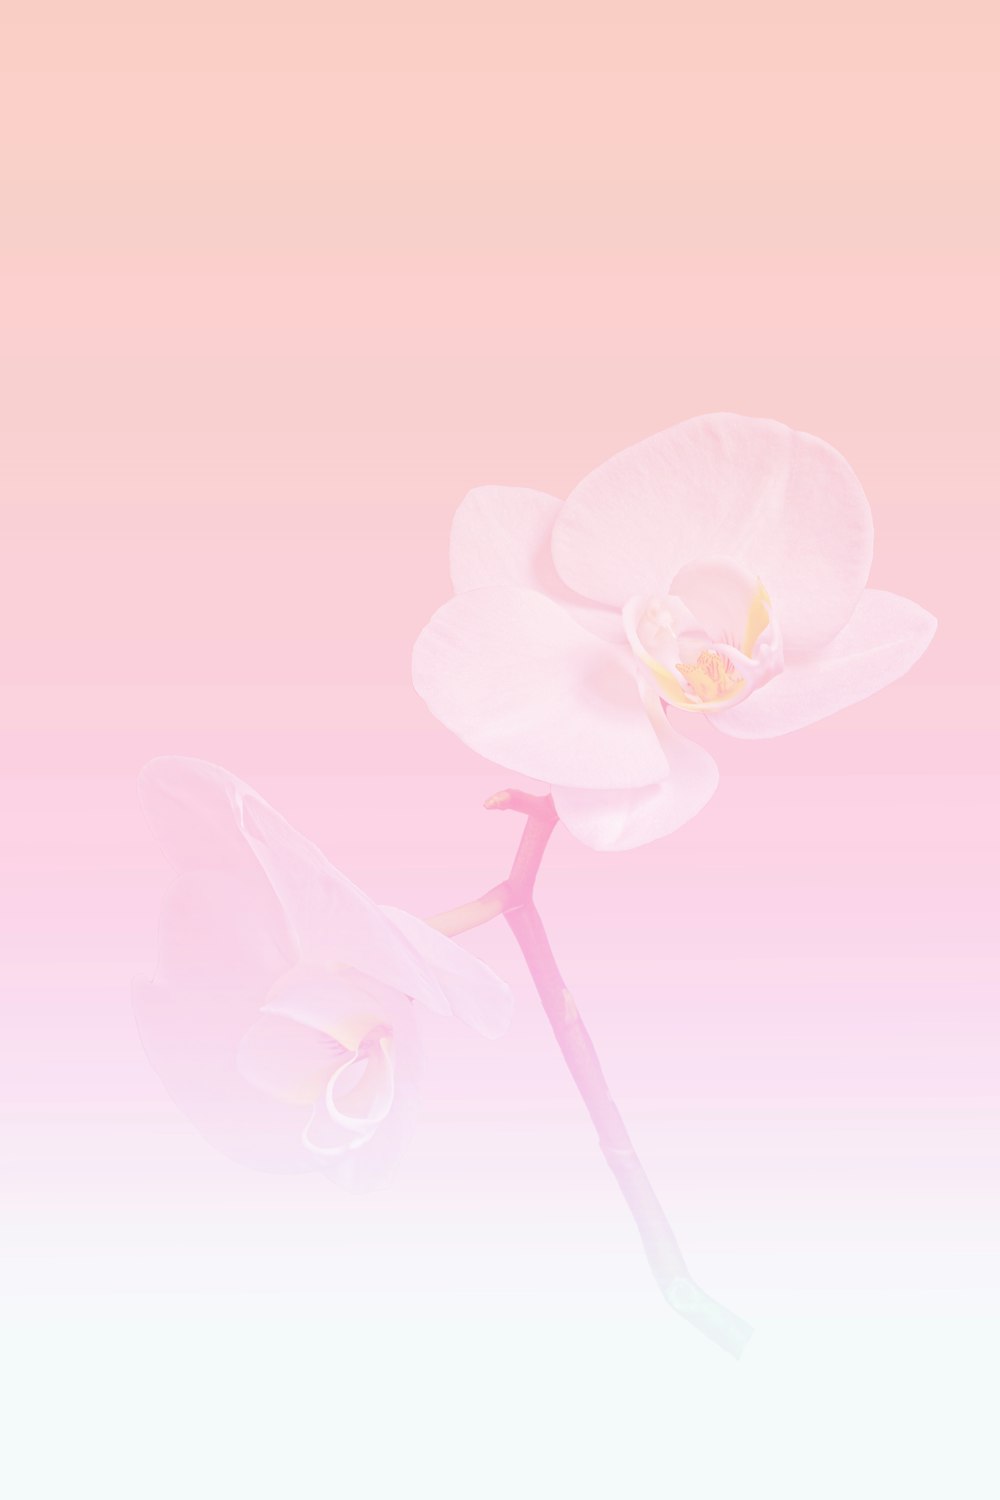 a single white flower on a pink background